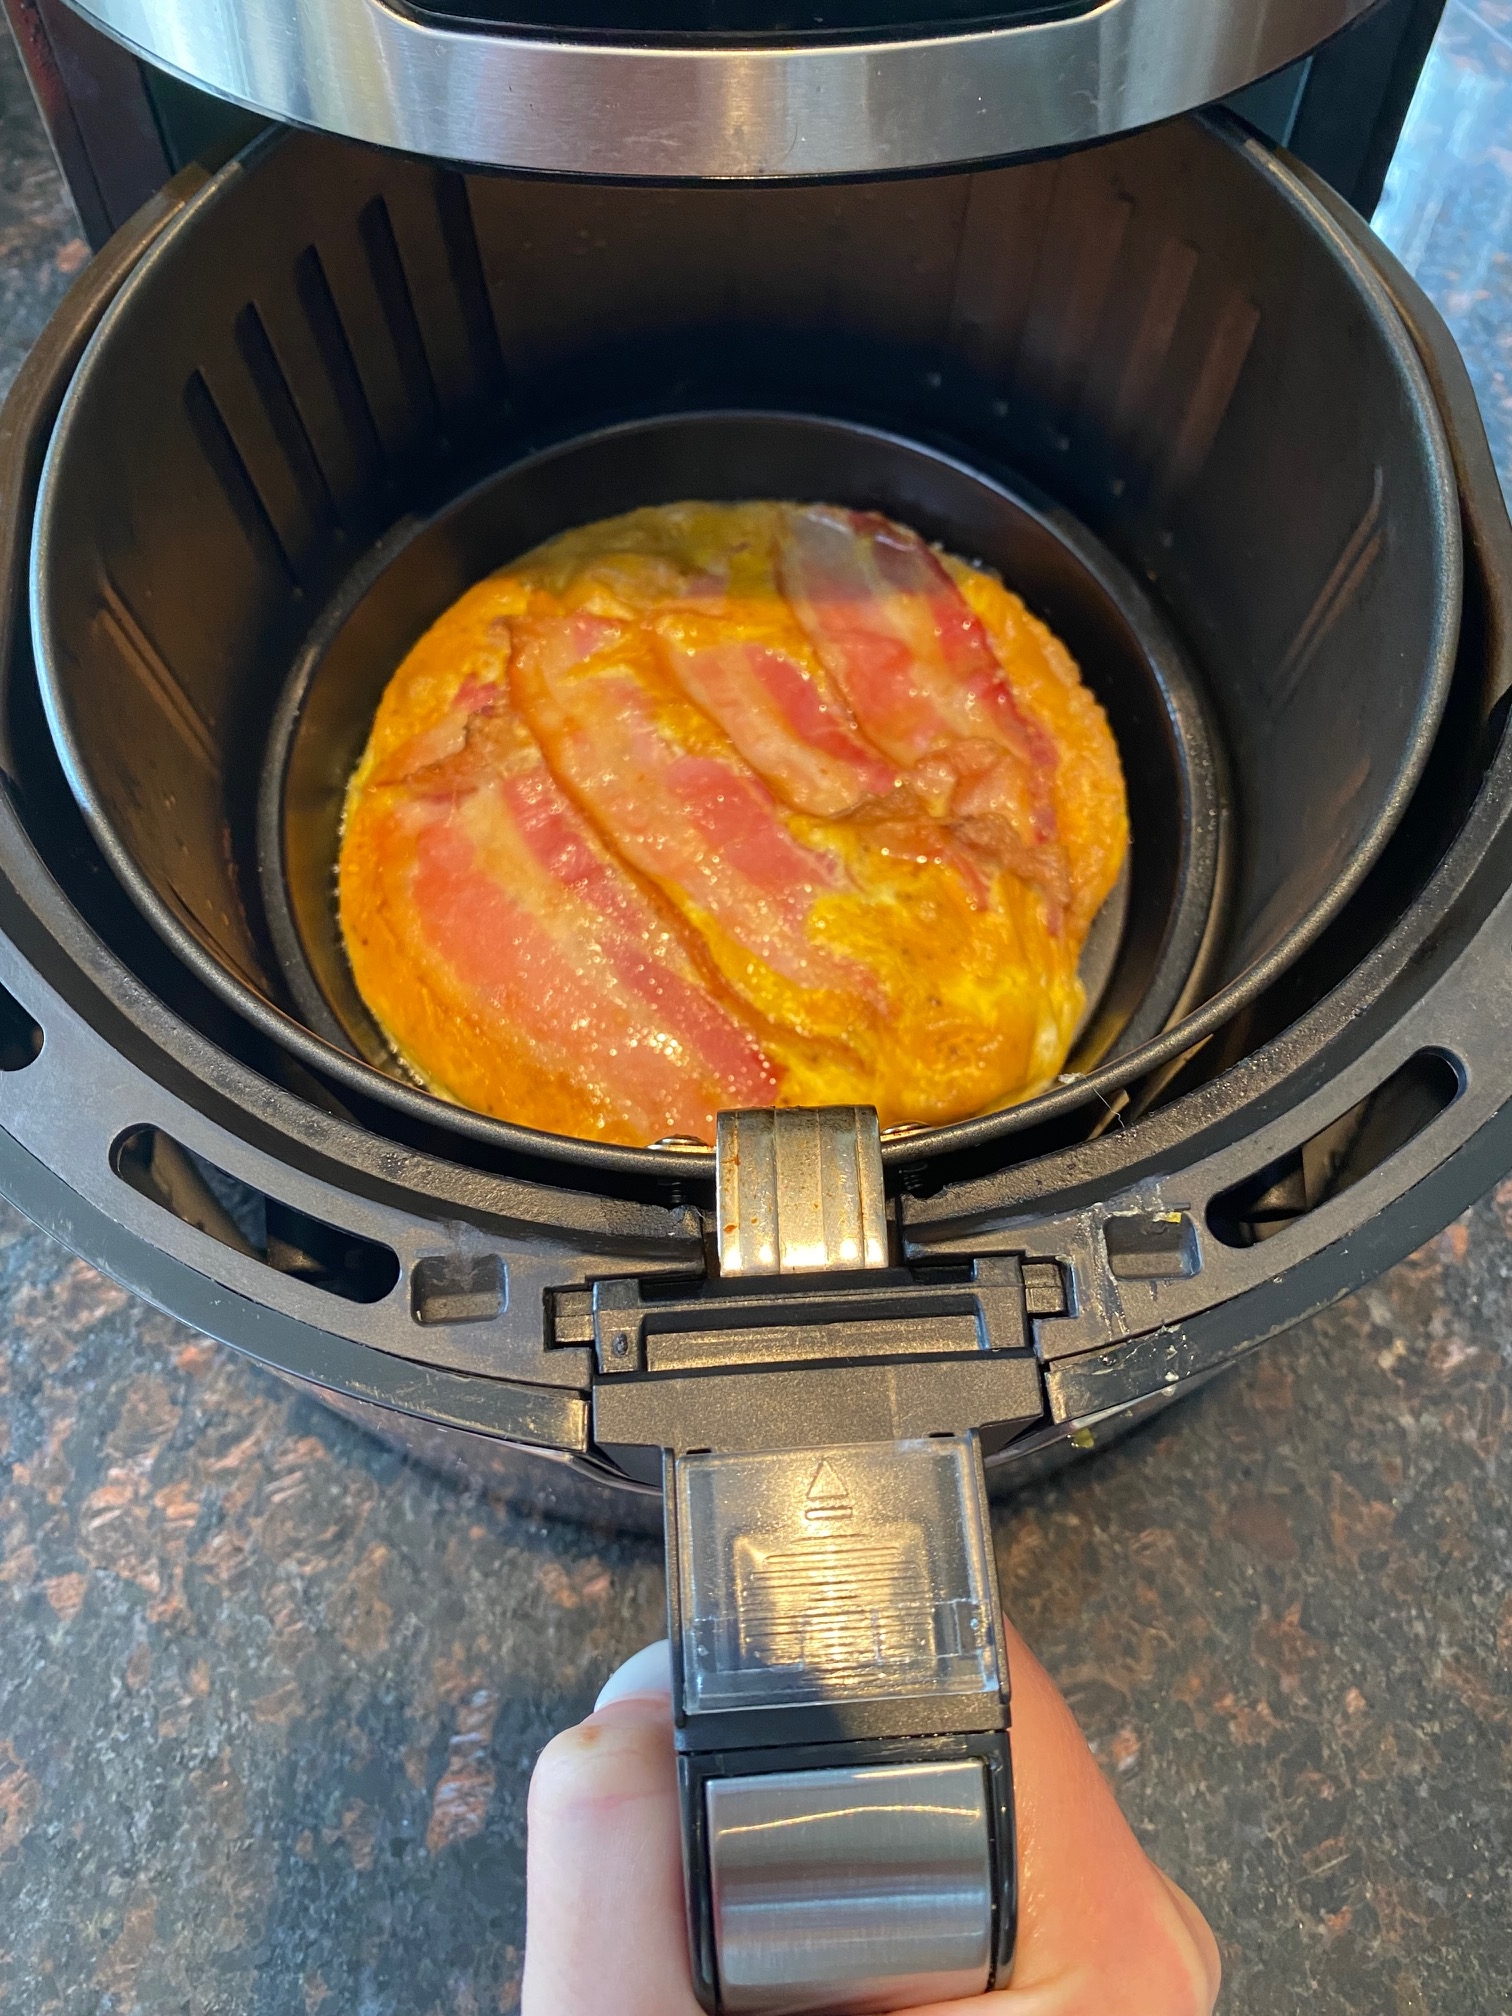 Cooked bacon and eggs in the air fryer basket.